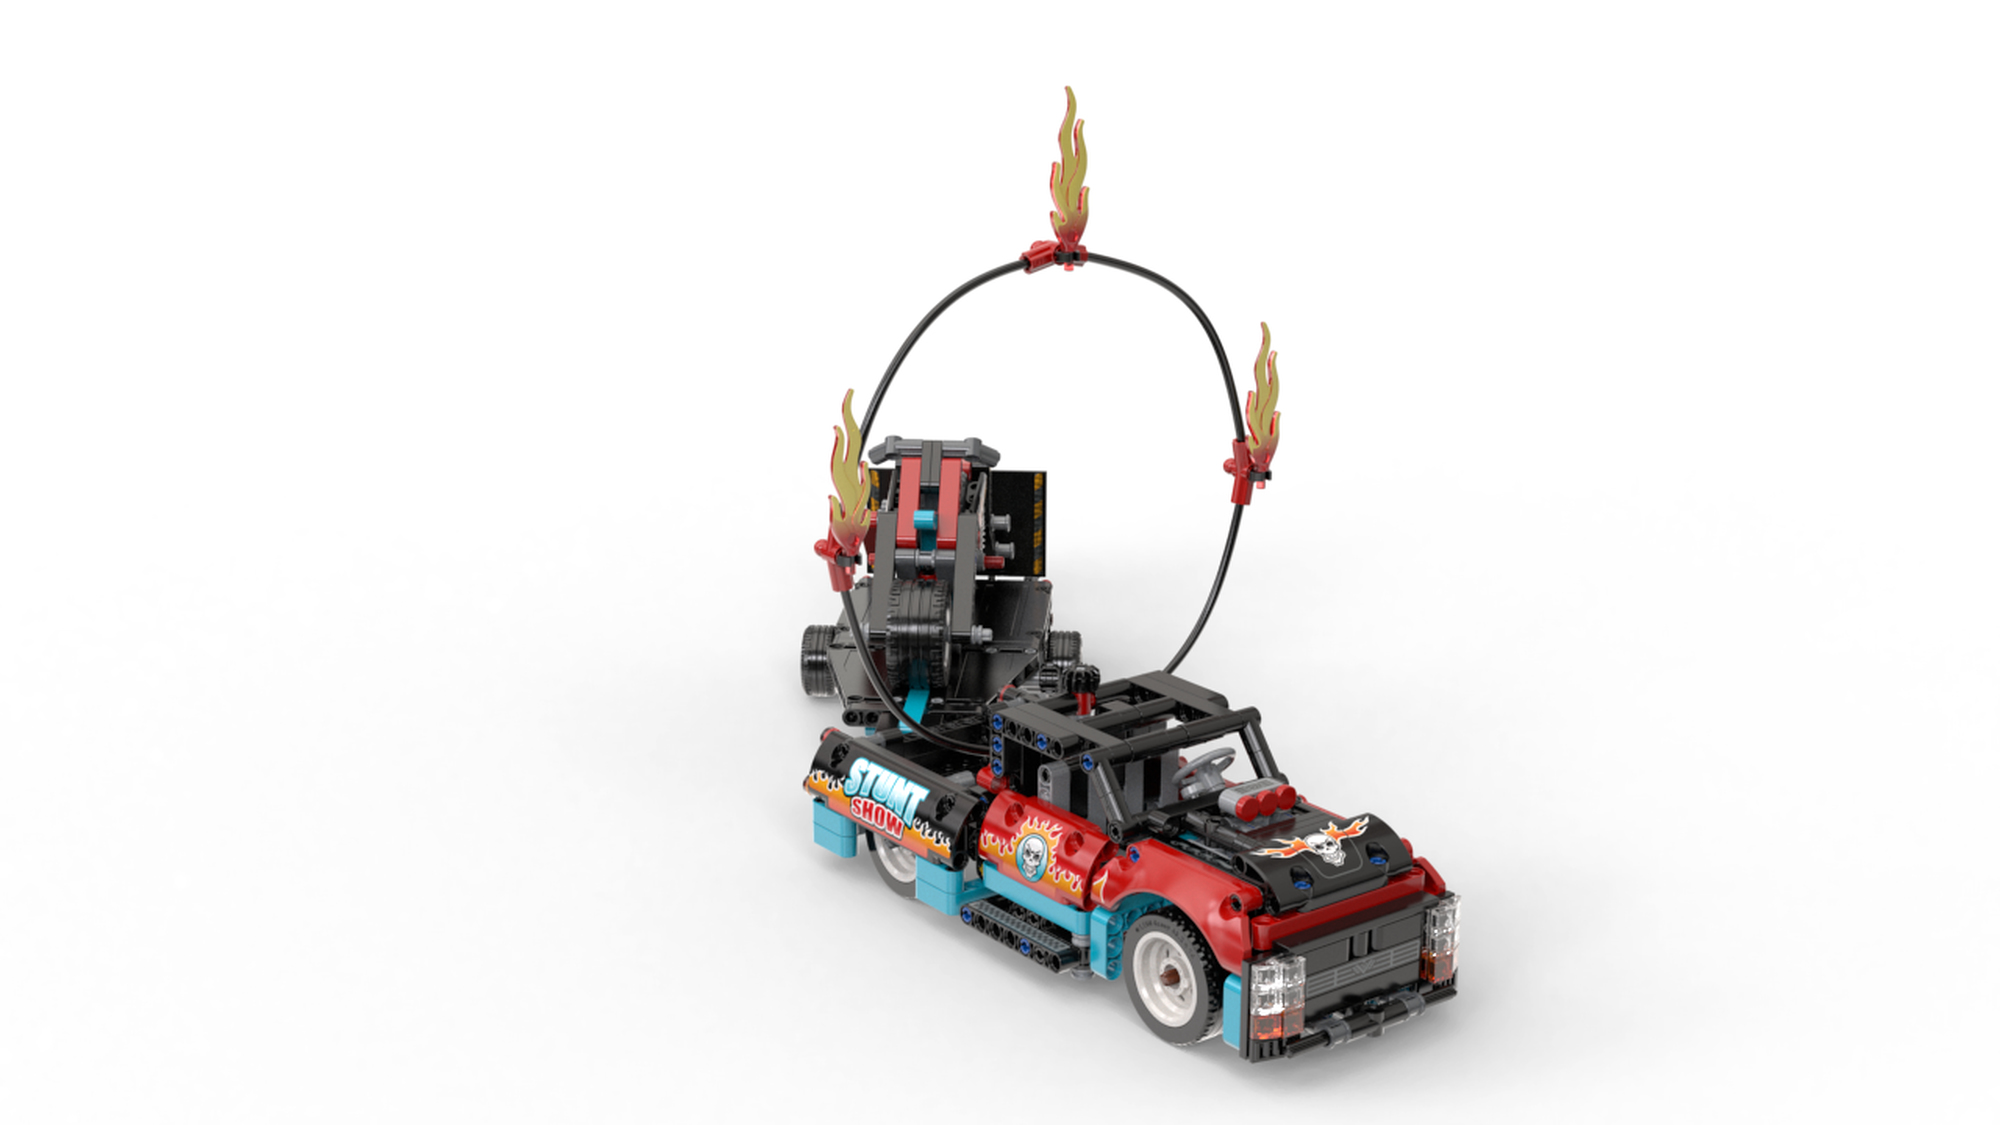 Construction Vehicles build a Lego Police station 